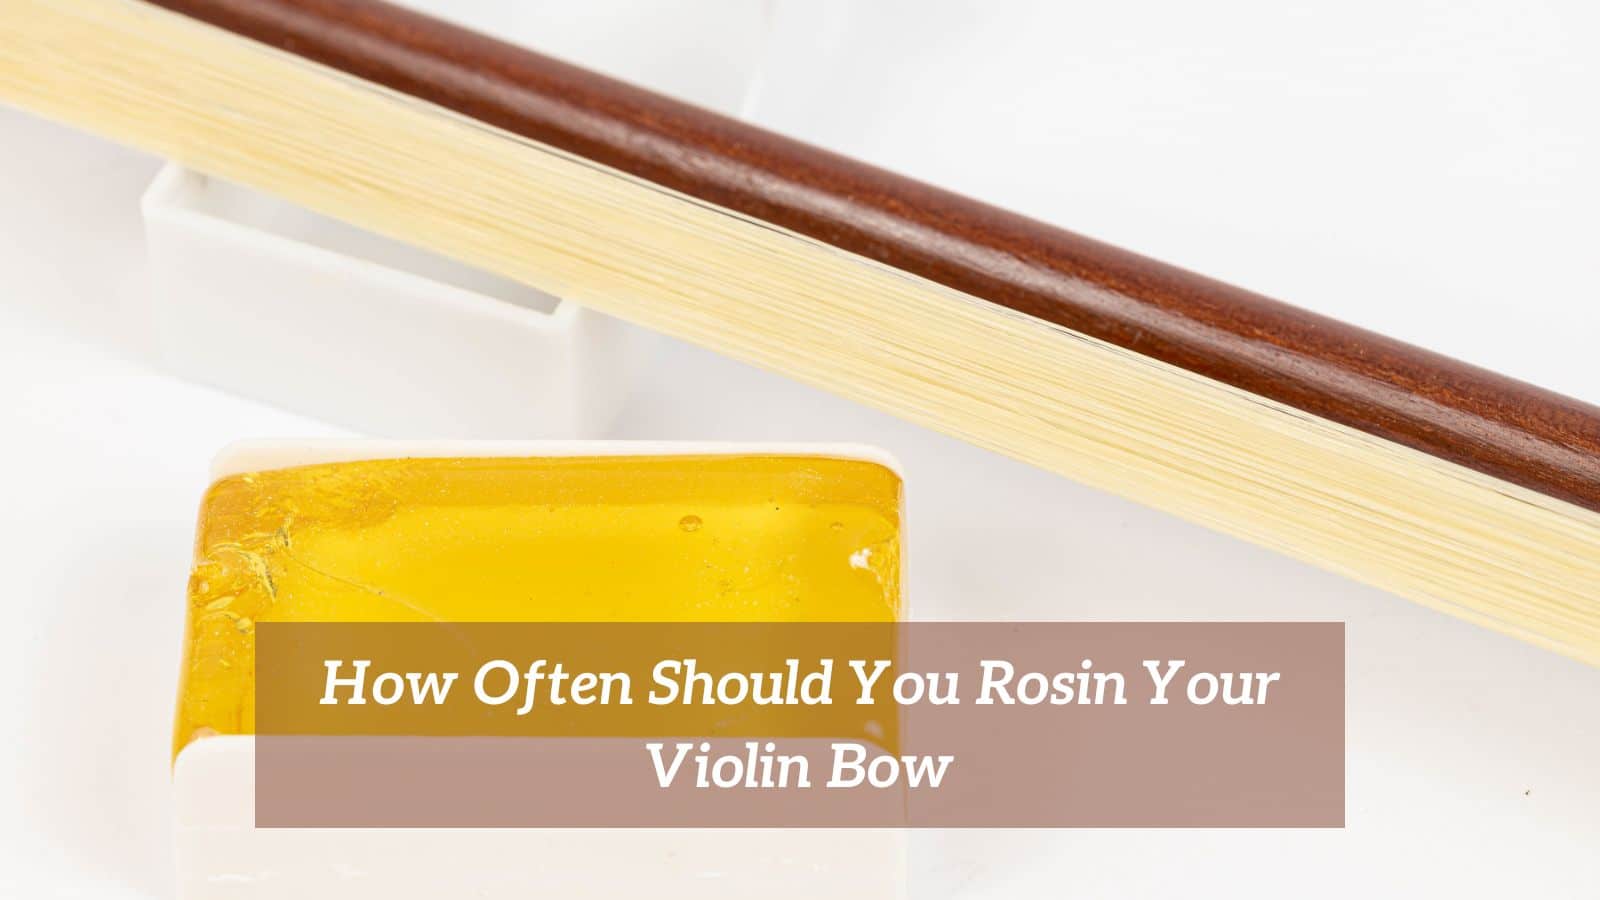 How Often Should You Rosin Your Violin Bow